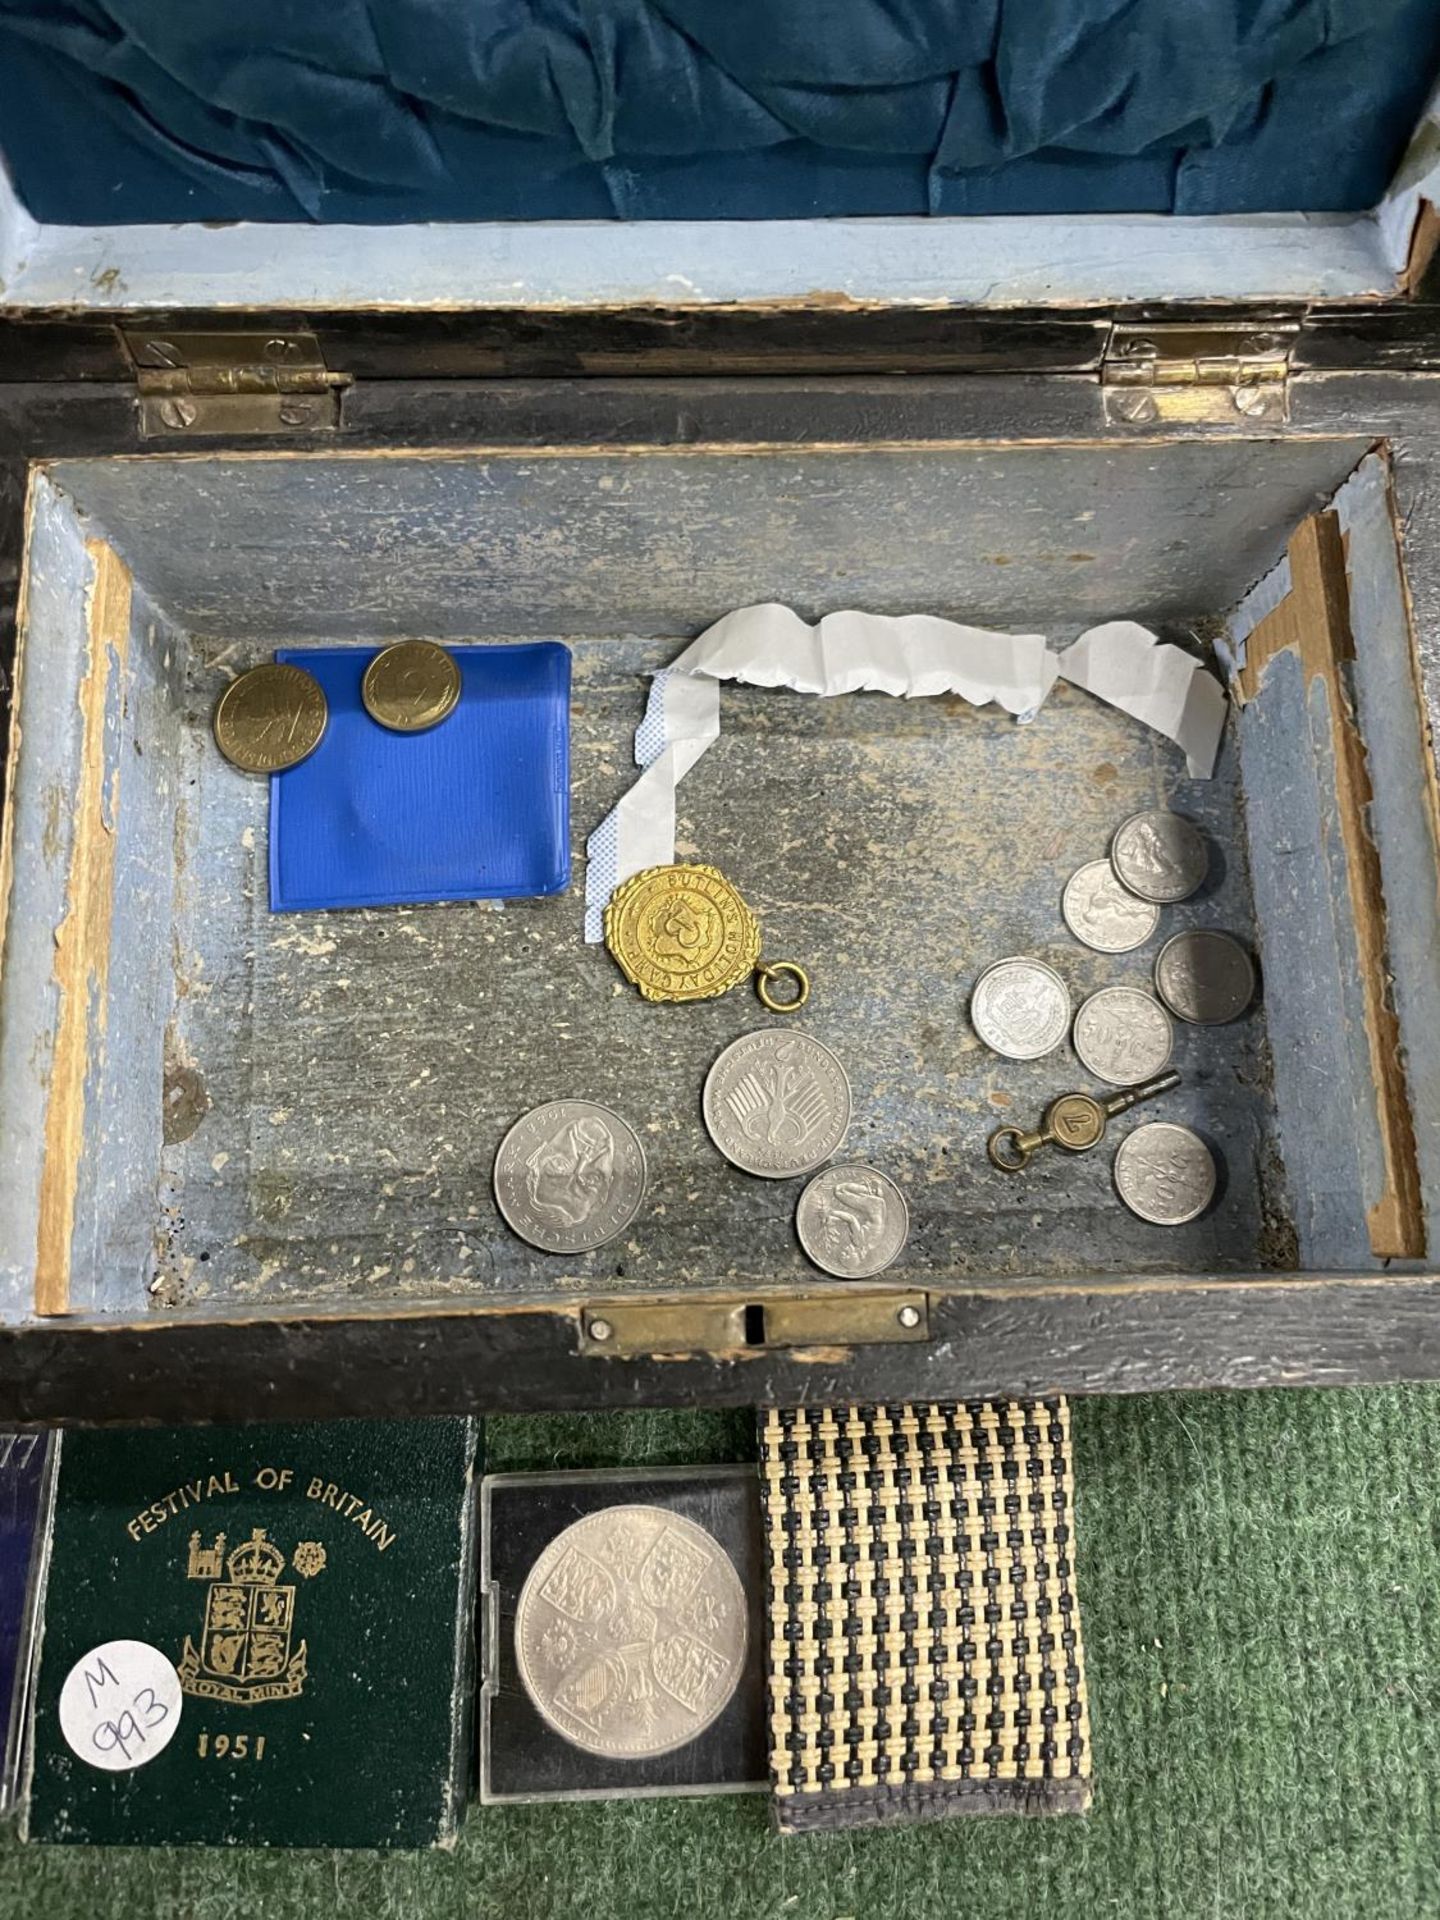 AN INLAID BOX CONTAINING A VESTA CASE, WORLD COINS AND FIVE COMMEMORATIVE CROWNS - Image 3 of 3